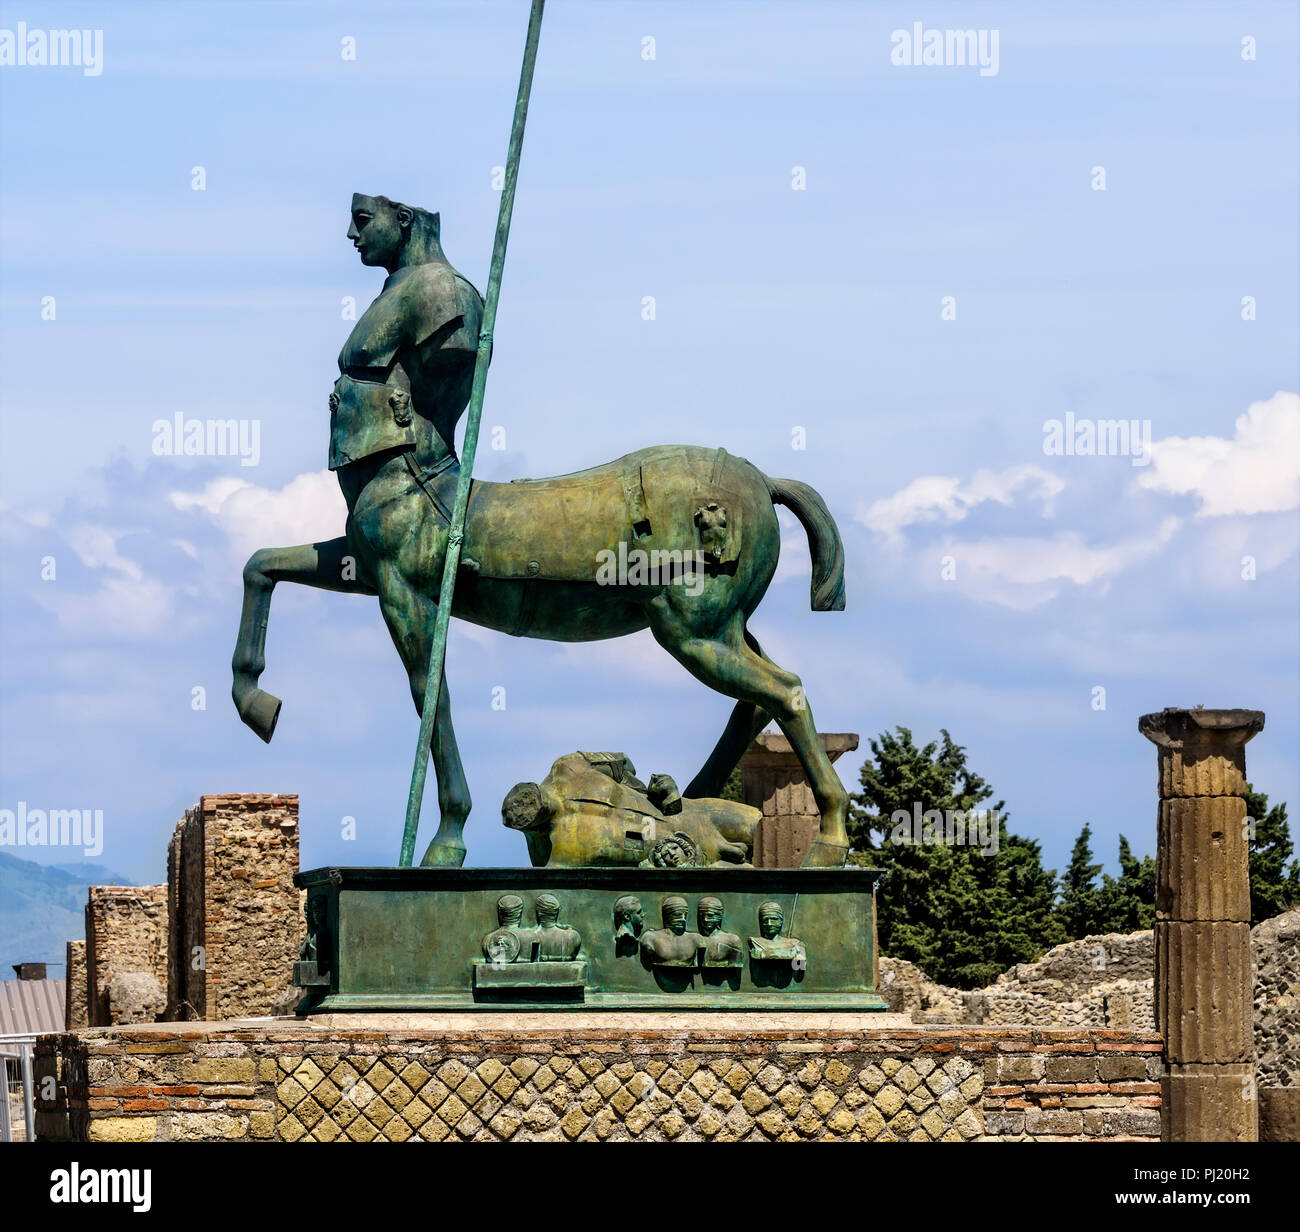 Naples, Italy - June 11, 2016:  Statue of a Centaur, a mythical creature, half horse and half man, displayed in the ruined city of Pompeii. Stock Photo